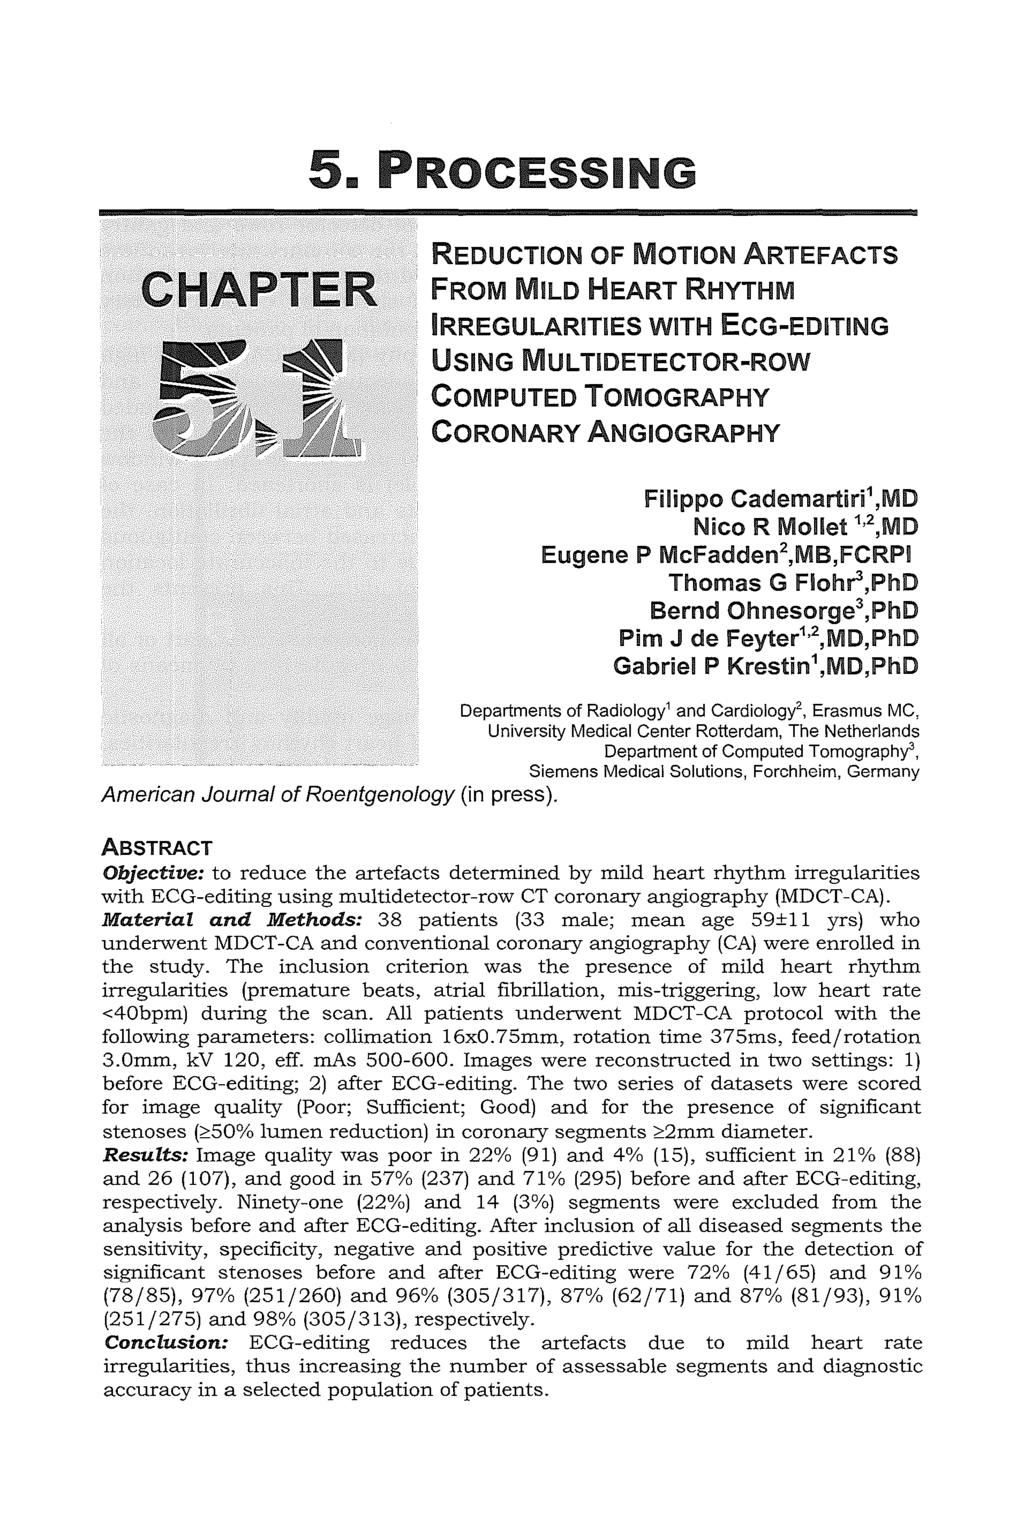 5.. PROCESSING CHAPTER REDUCTION OF MOTION ARTEFACTS FROM MILD HEART RHYTHM IRREGULARITIES WITH EGG-EDITING USING MUL TIDETECTOR-ROW COMPUTED TOMOGRAPHY CORONARY ANGIOGRAPHY Filippo Cademartiri 1,MD